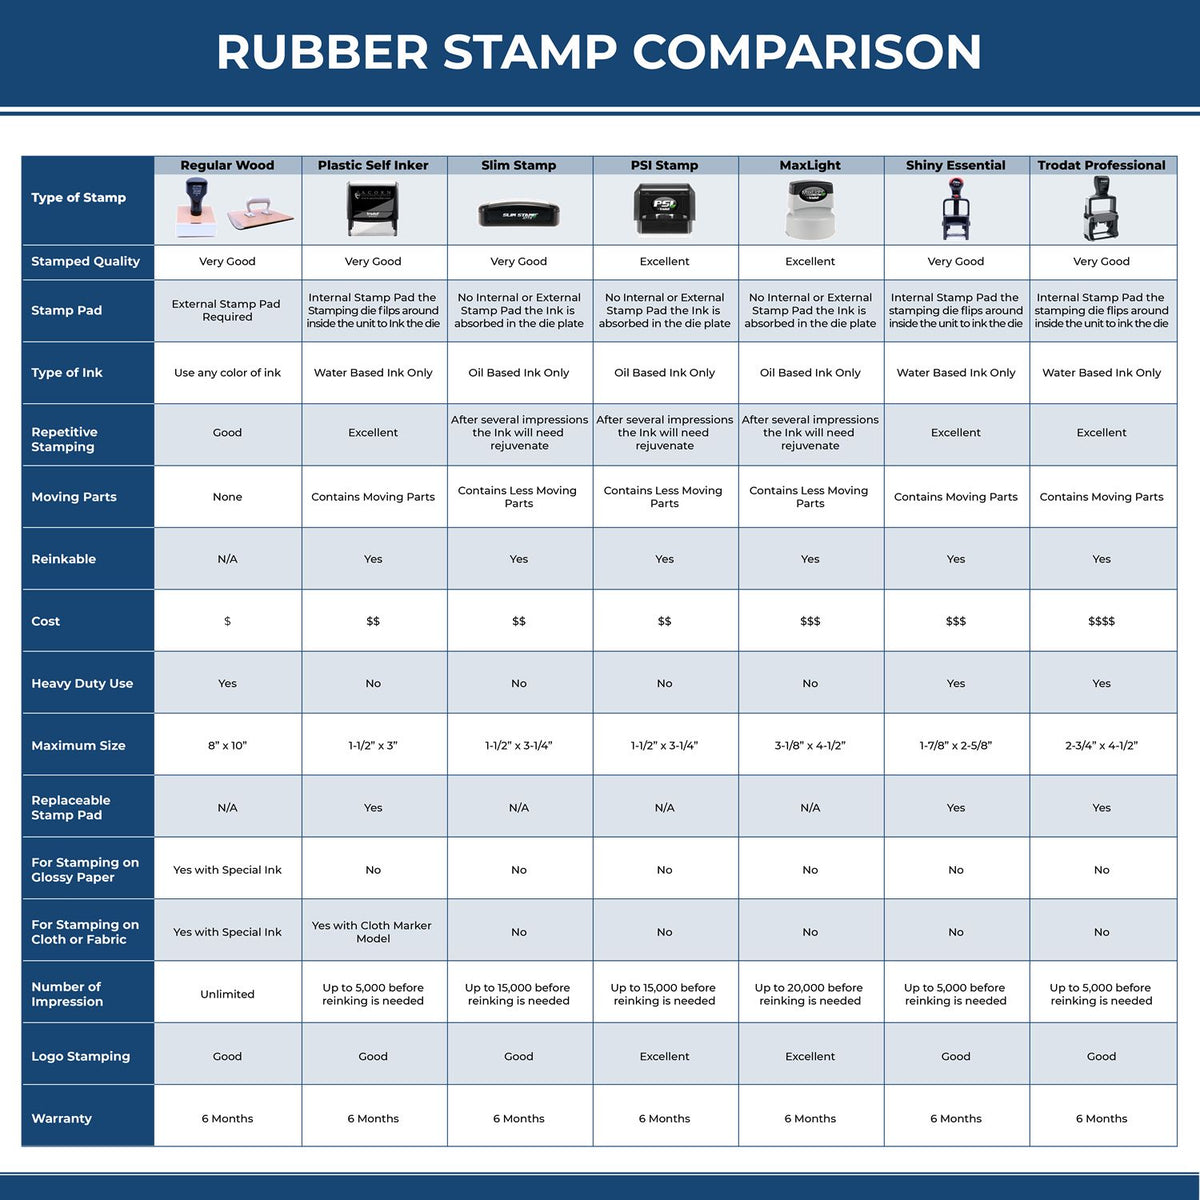 A comparison chart for the different types of mount models available for the Self-Inking Louisiana PE Stamp.